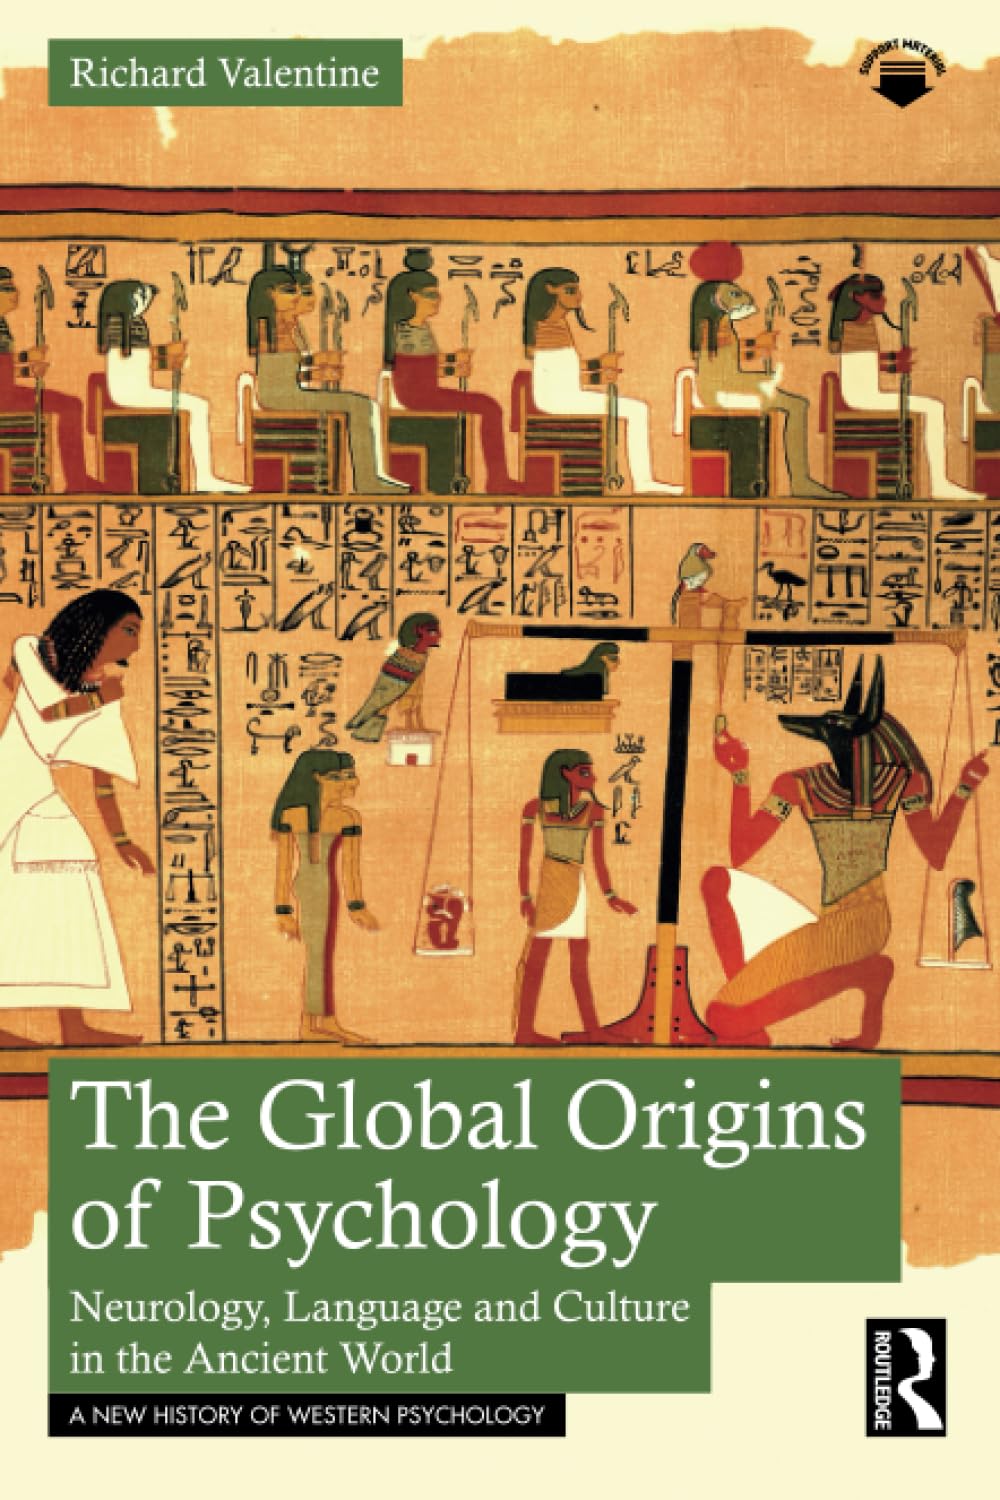 The Global Origins of Psychology, book cover